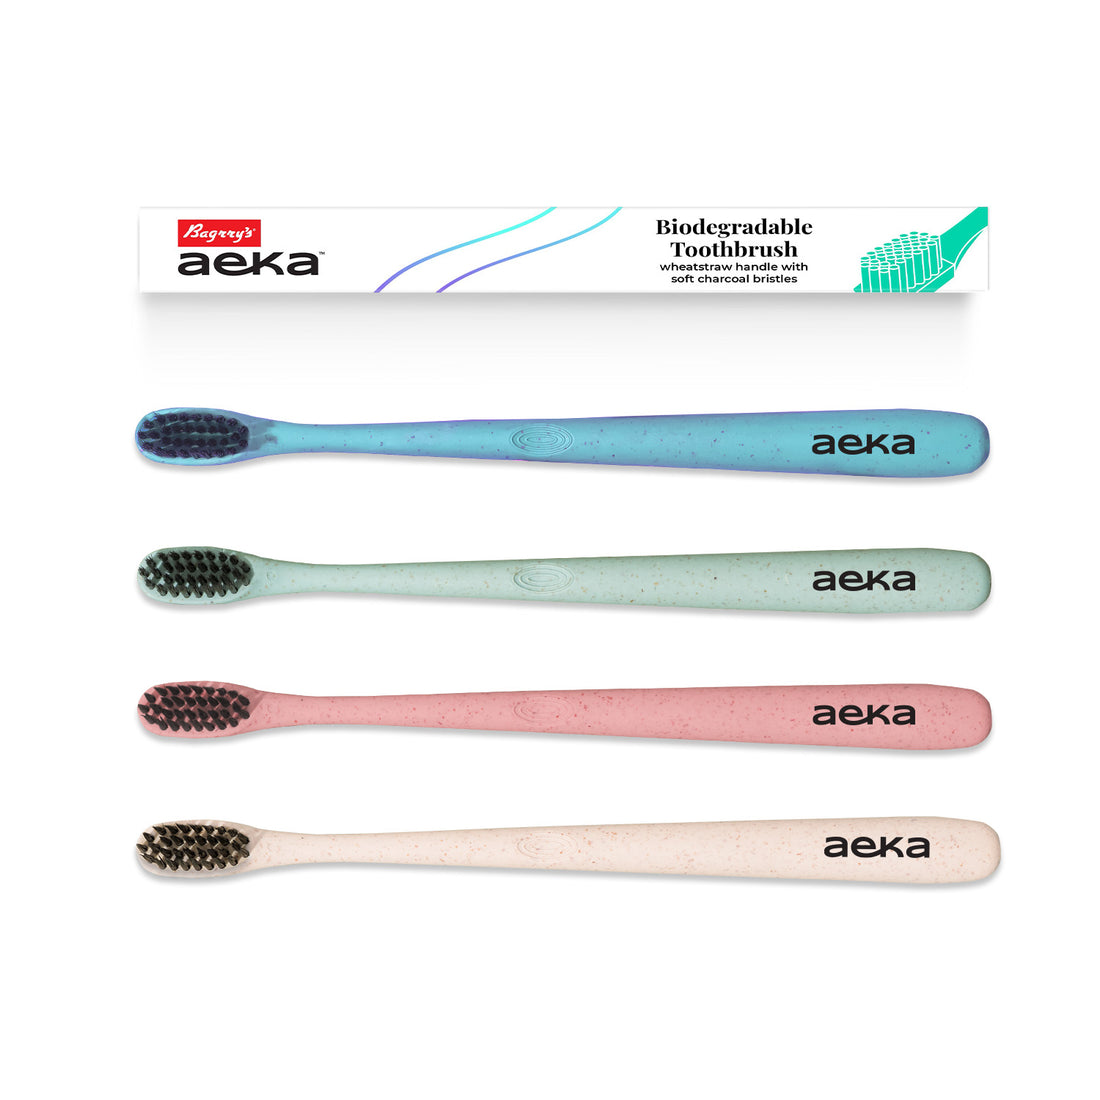 Aeka Biodegradable Toothbrush | Wheat Straw Handle - Pack of 4 (Green, Pink, White, Blue)